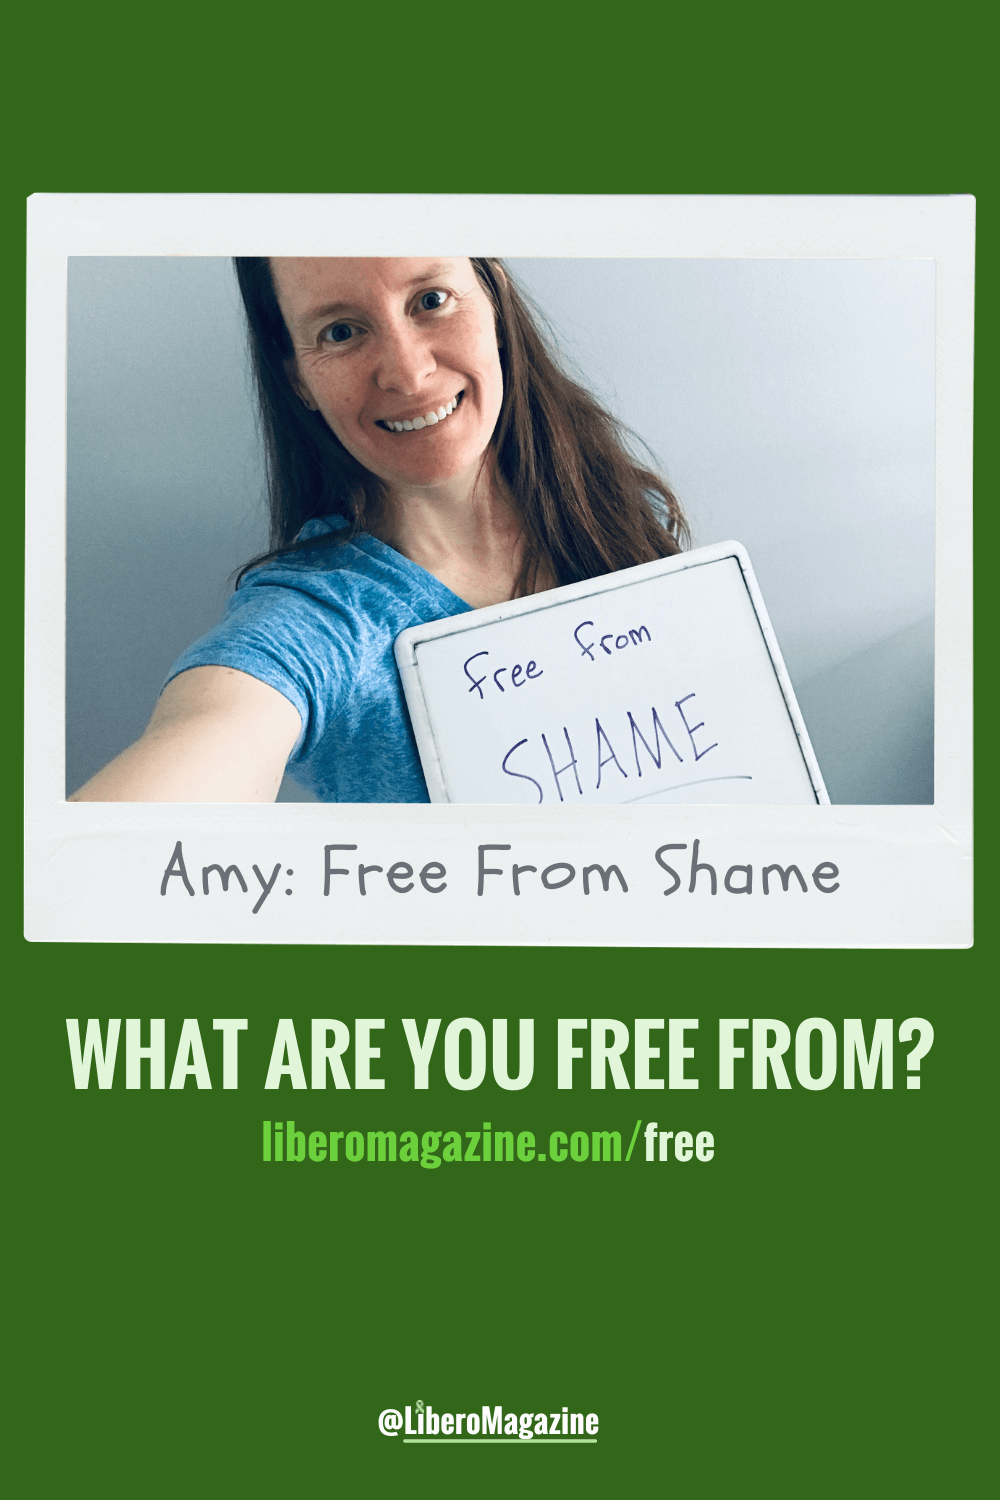 Amy "Free from shame" pin